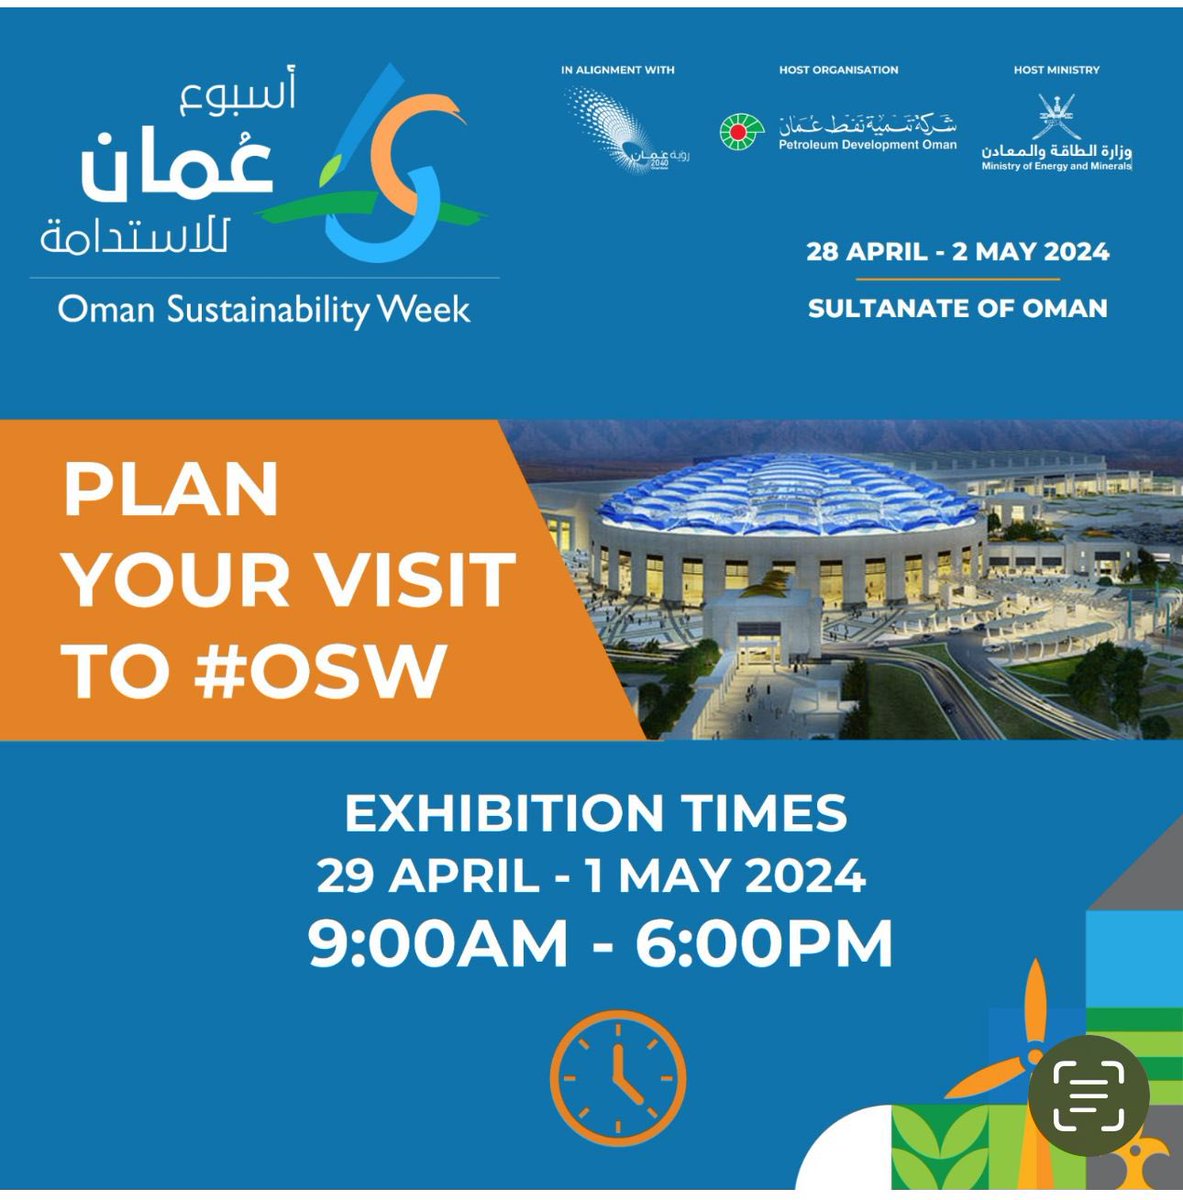 A whole week of bringing international and local knowledge, investment opportunities and best practices in sustainability in relation to the energy, water and environment prospects, #Oman_Sustainability_Week kicks off today at Oman Convention & Exhibition Centre.